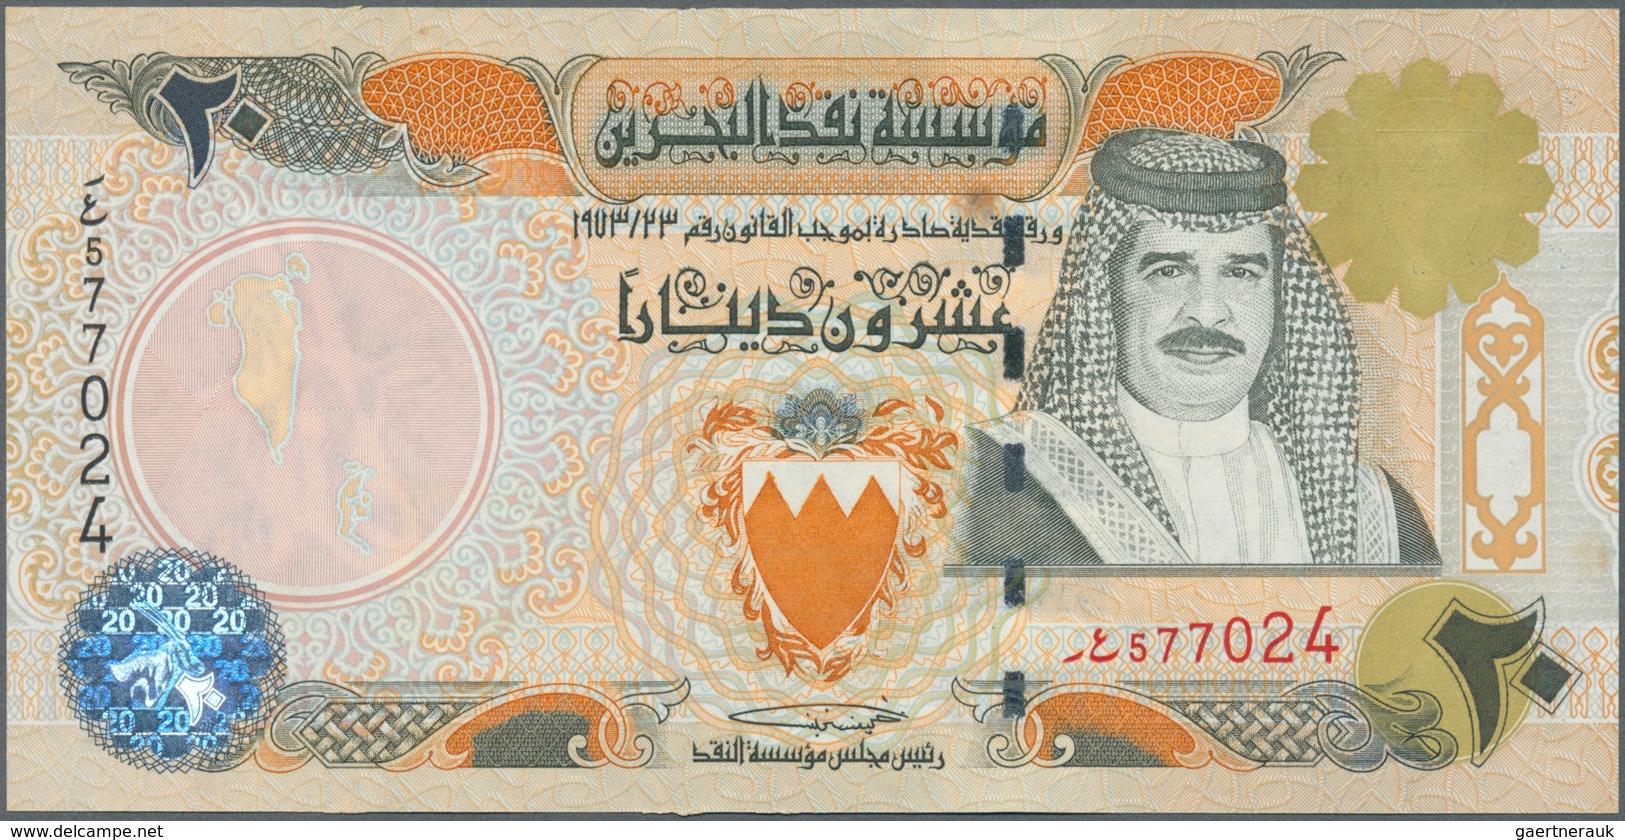 01109 Bahrain: Set Of 2 CONSECUTIVE Banknotes Of 20 Rials ND P. 24 With Serial Numbers #577024 & #577025, - Bahrein